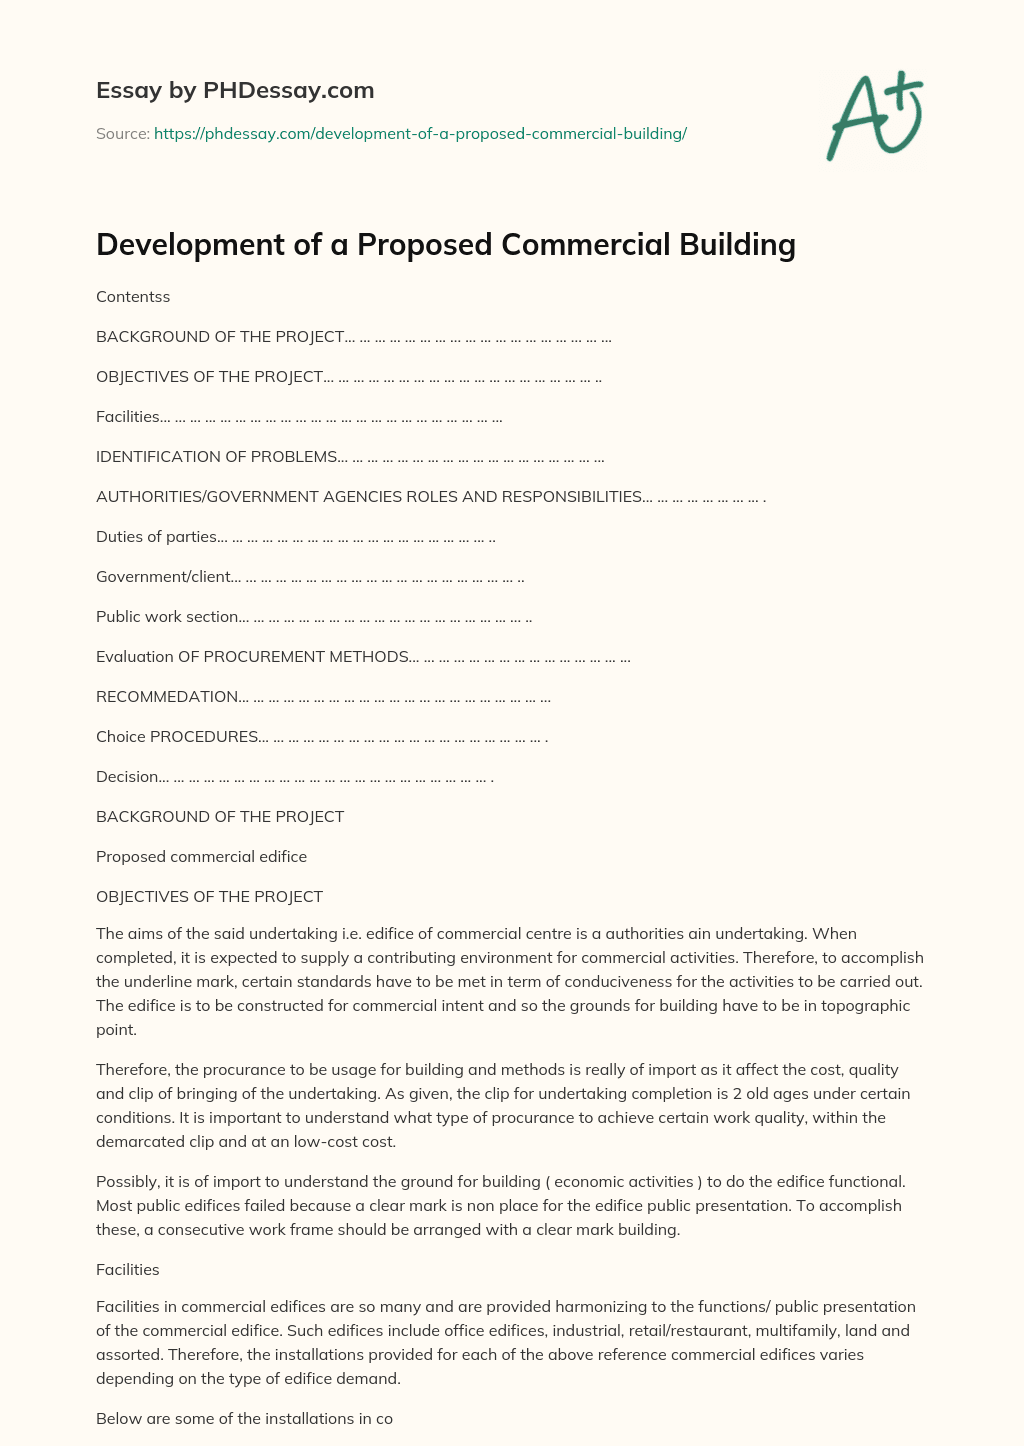 Development of a Proposed Commercial Building essay